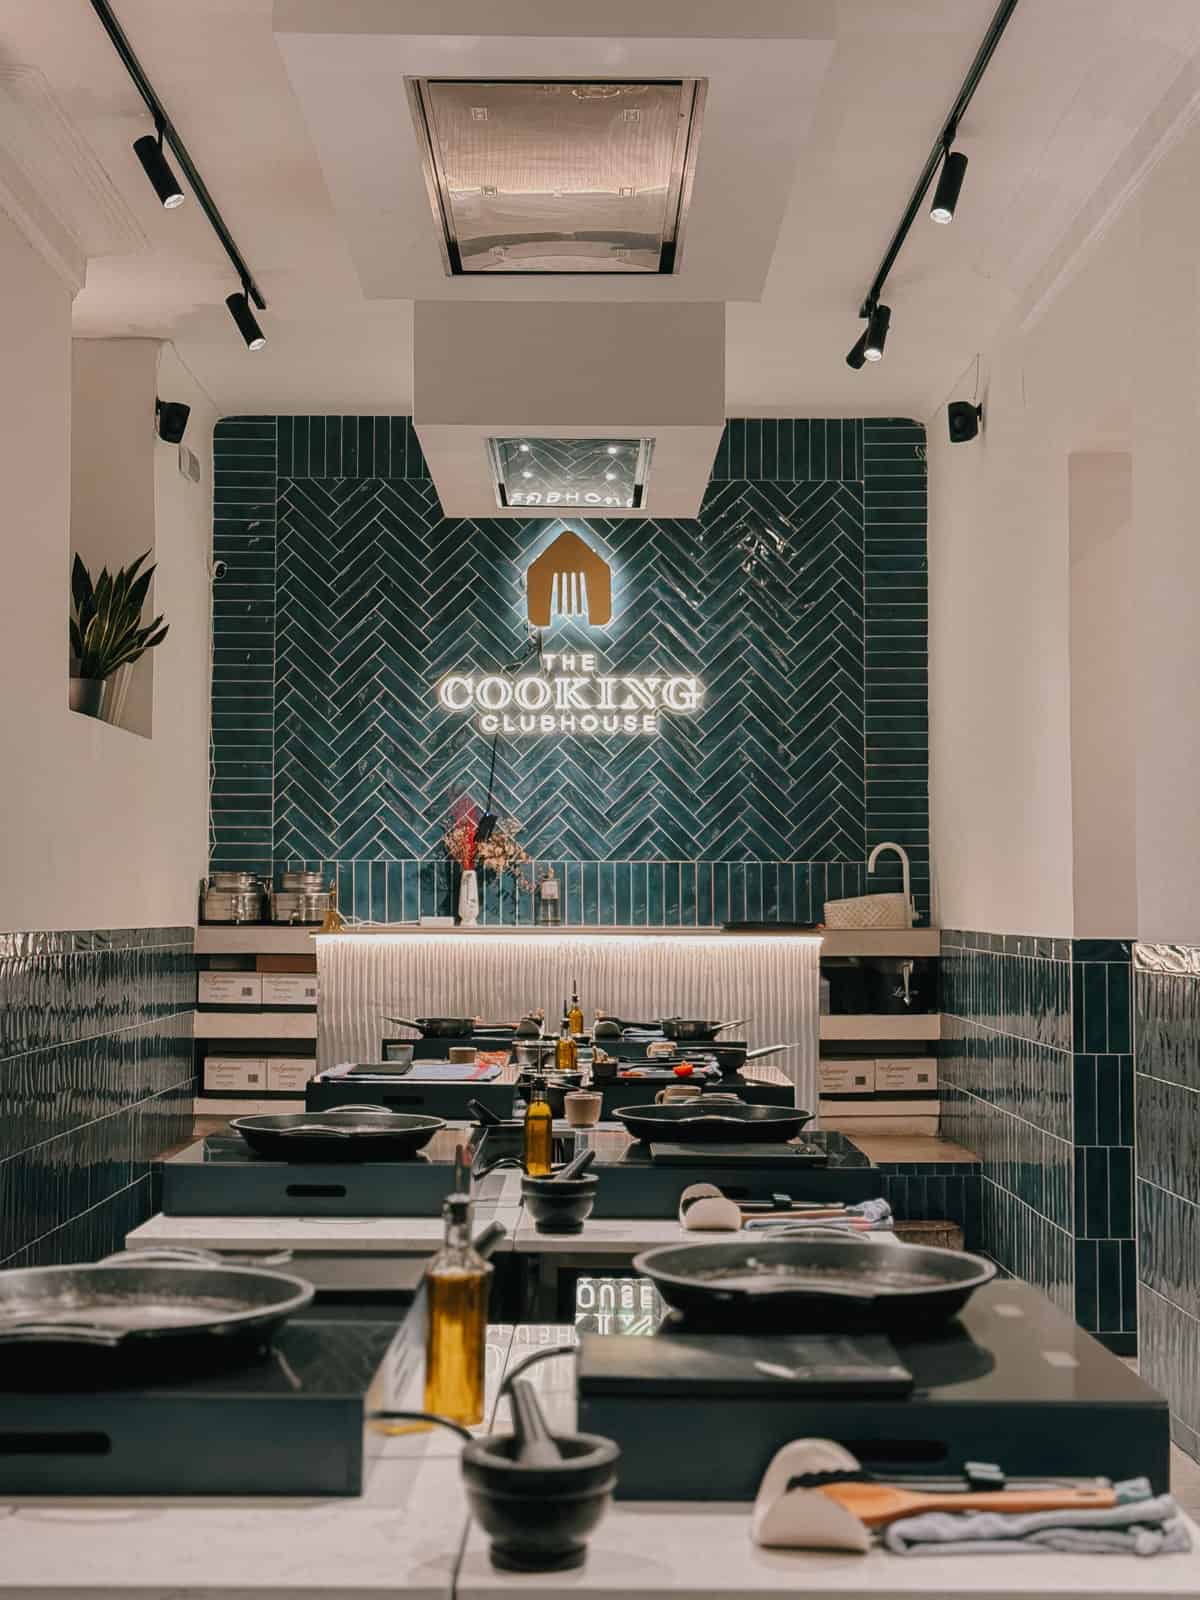 The elegant interior of The Cooking Clubhouse with a sleek, modern kitchen setup, featuring dark teal herringbone tiles and cooking stations ready for a culinary workshop, exuding a stylish and inviting atmosphere for food enthusiasts